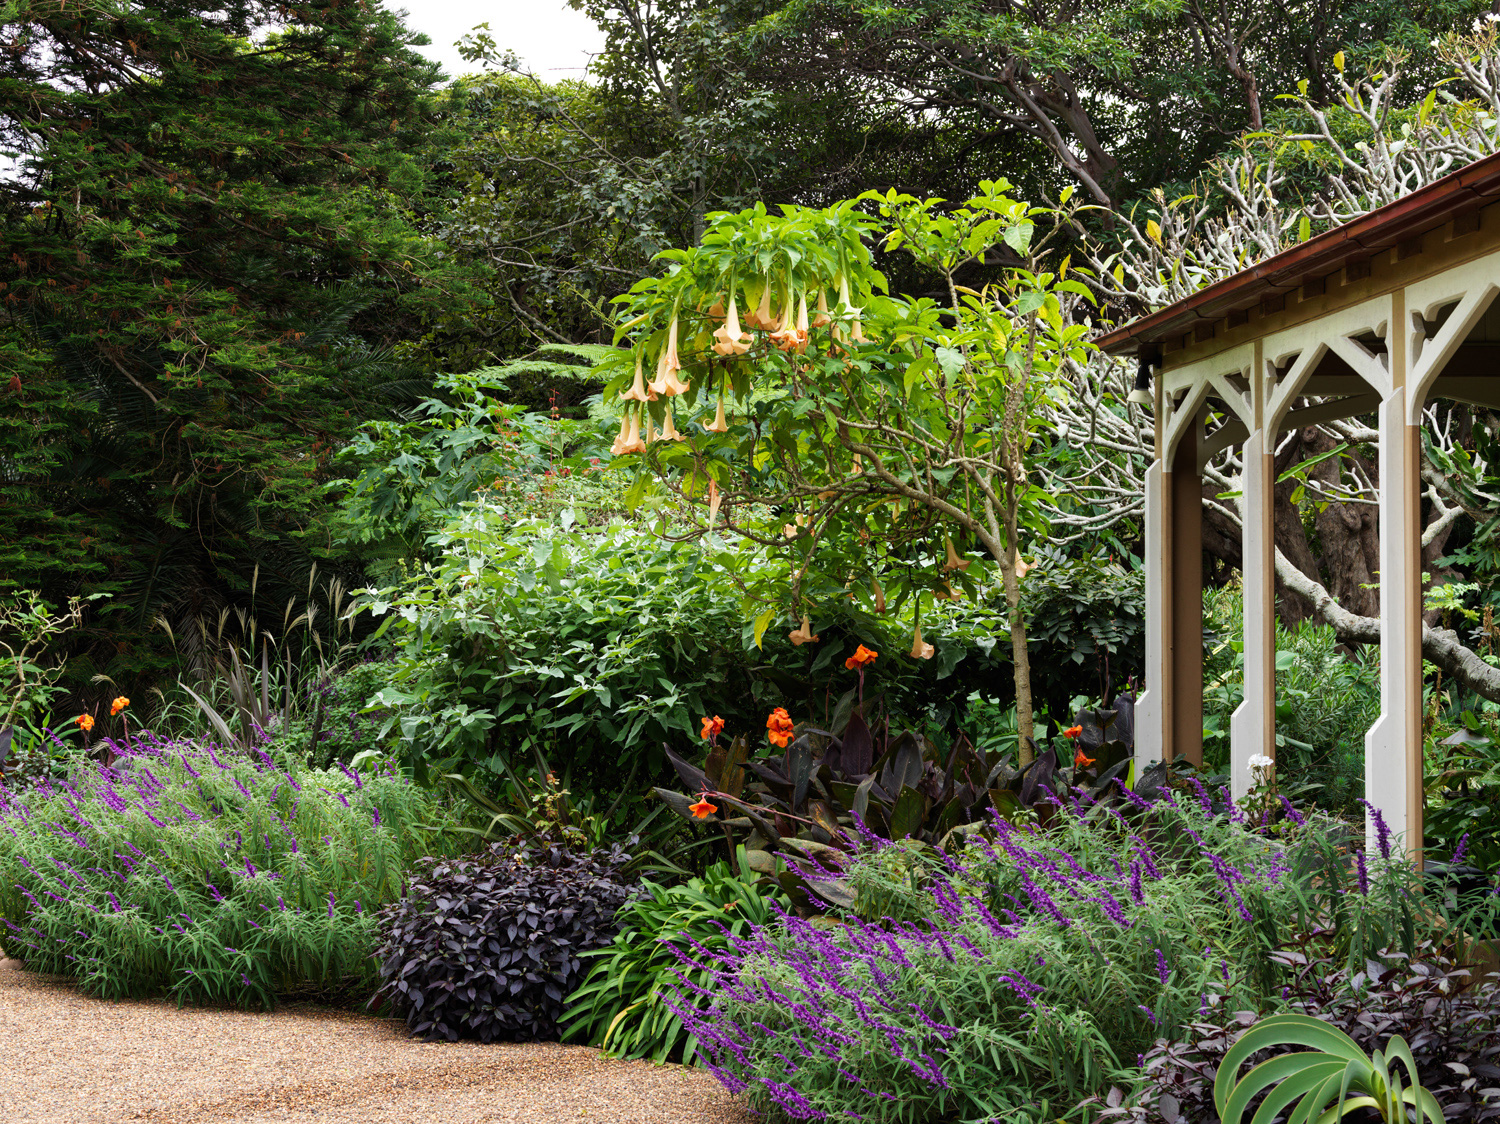 Bronte house, maintained by Pepo Botanic Design has many secret paths and expansive lawns, this two-acre garden epitomises a magical sanctuary full of surprises